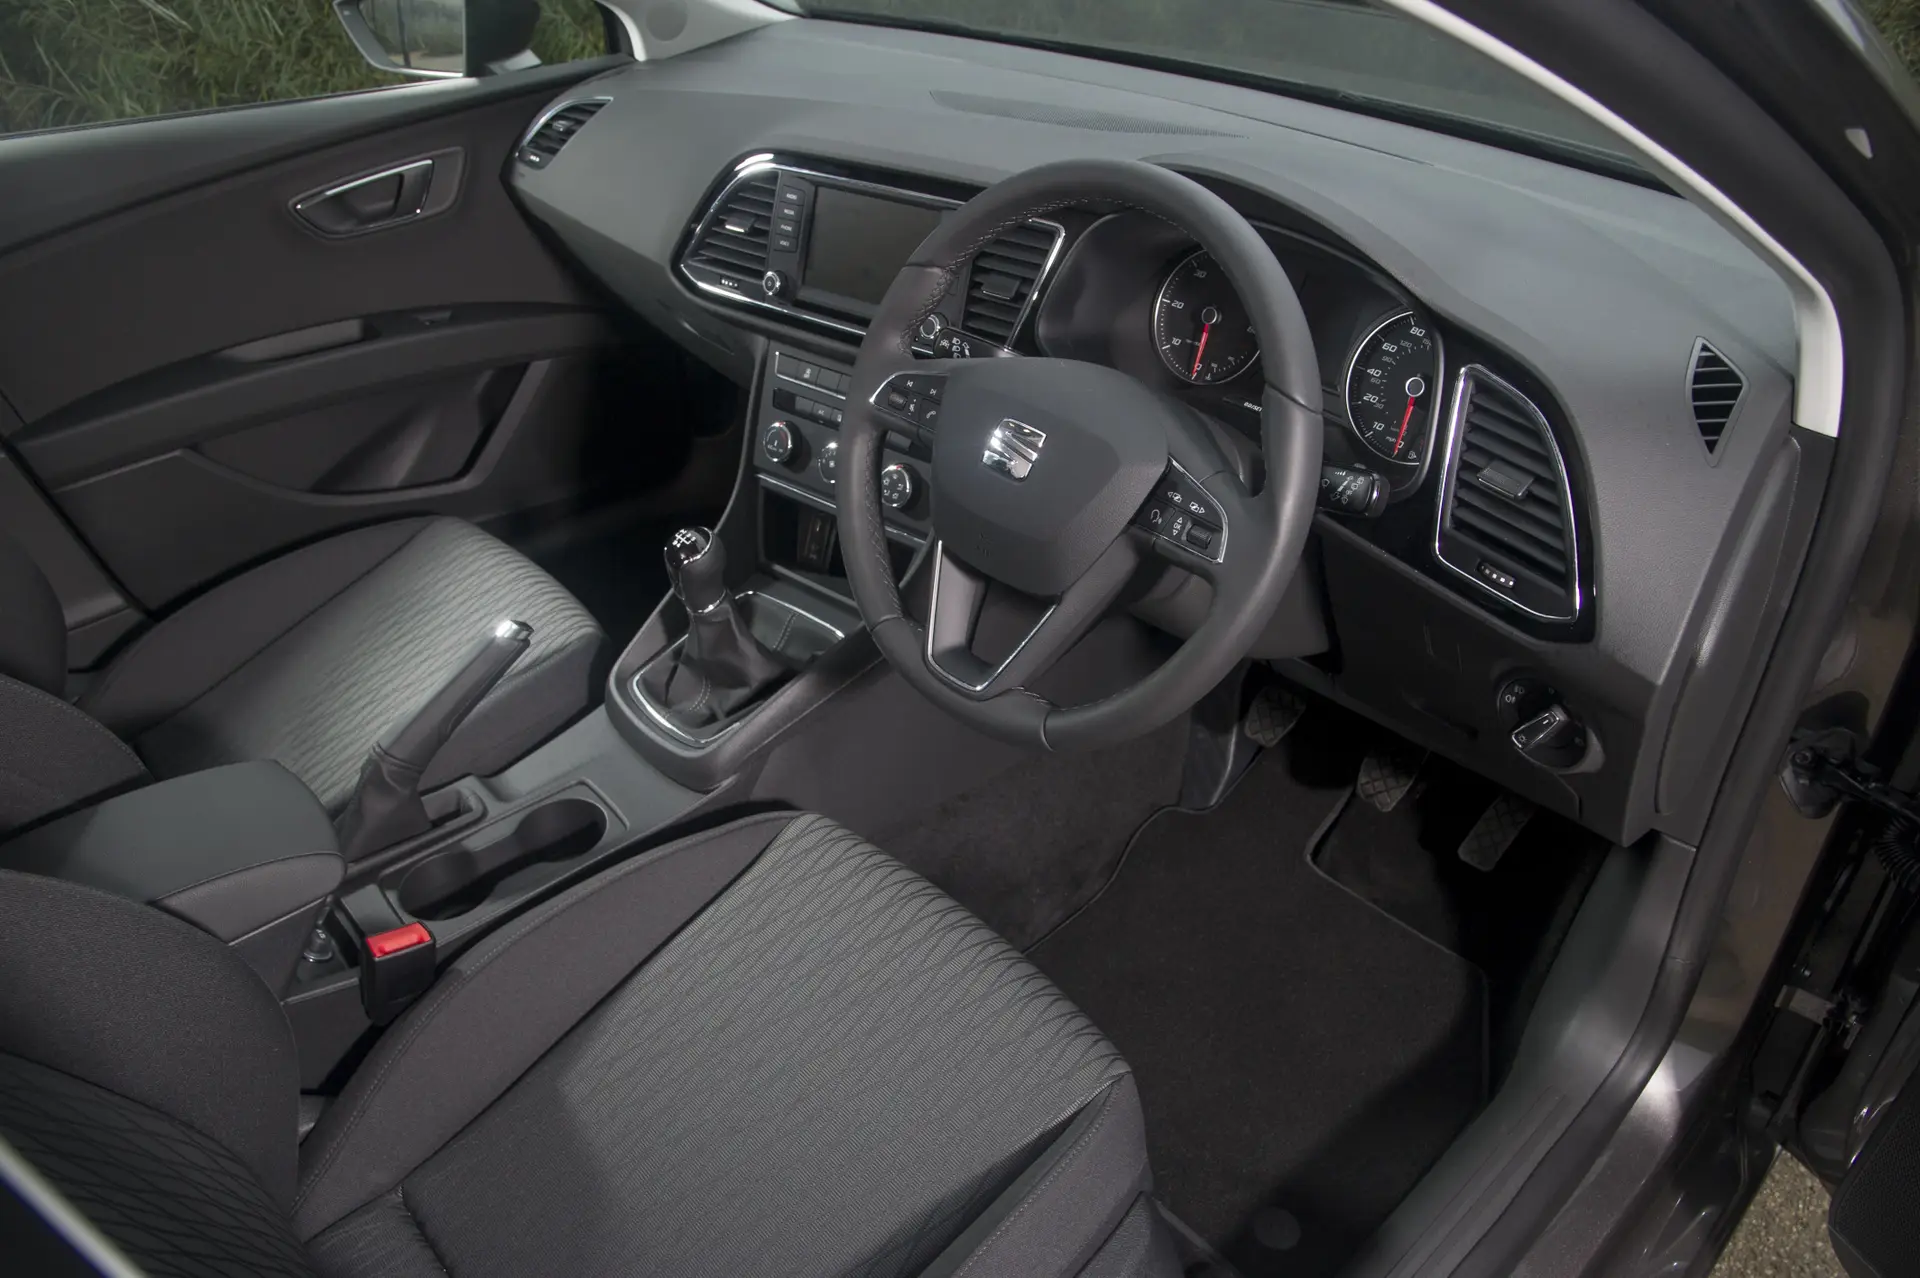 SEAT Leon ST (2014-2020) Review: interior close up photo of the SEAT Leon ST dashboard